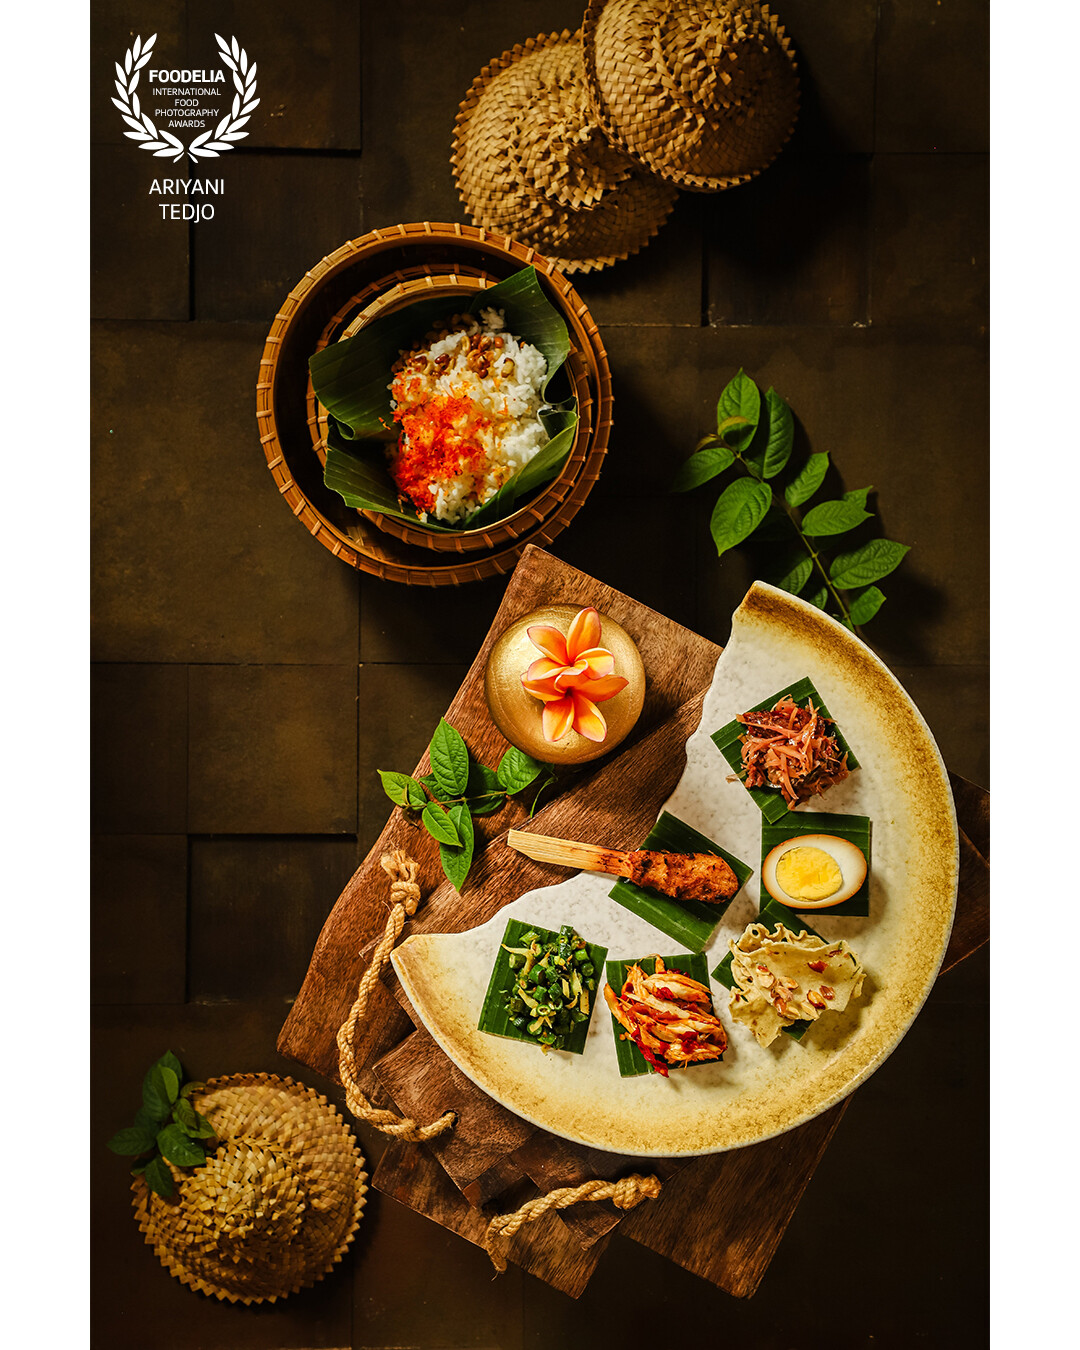 A popular Balinese meal called Nasi Campur Bali. Usually the rice and the side dishes are served all together on a single plate; the one here separate the rice and the side dishes. Two Balinese frangipani blossoms are used as decoration.